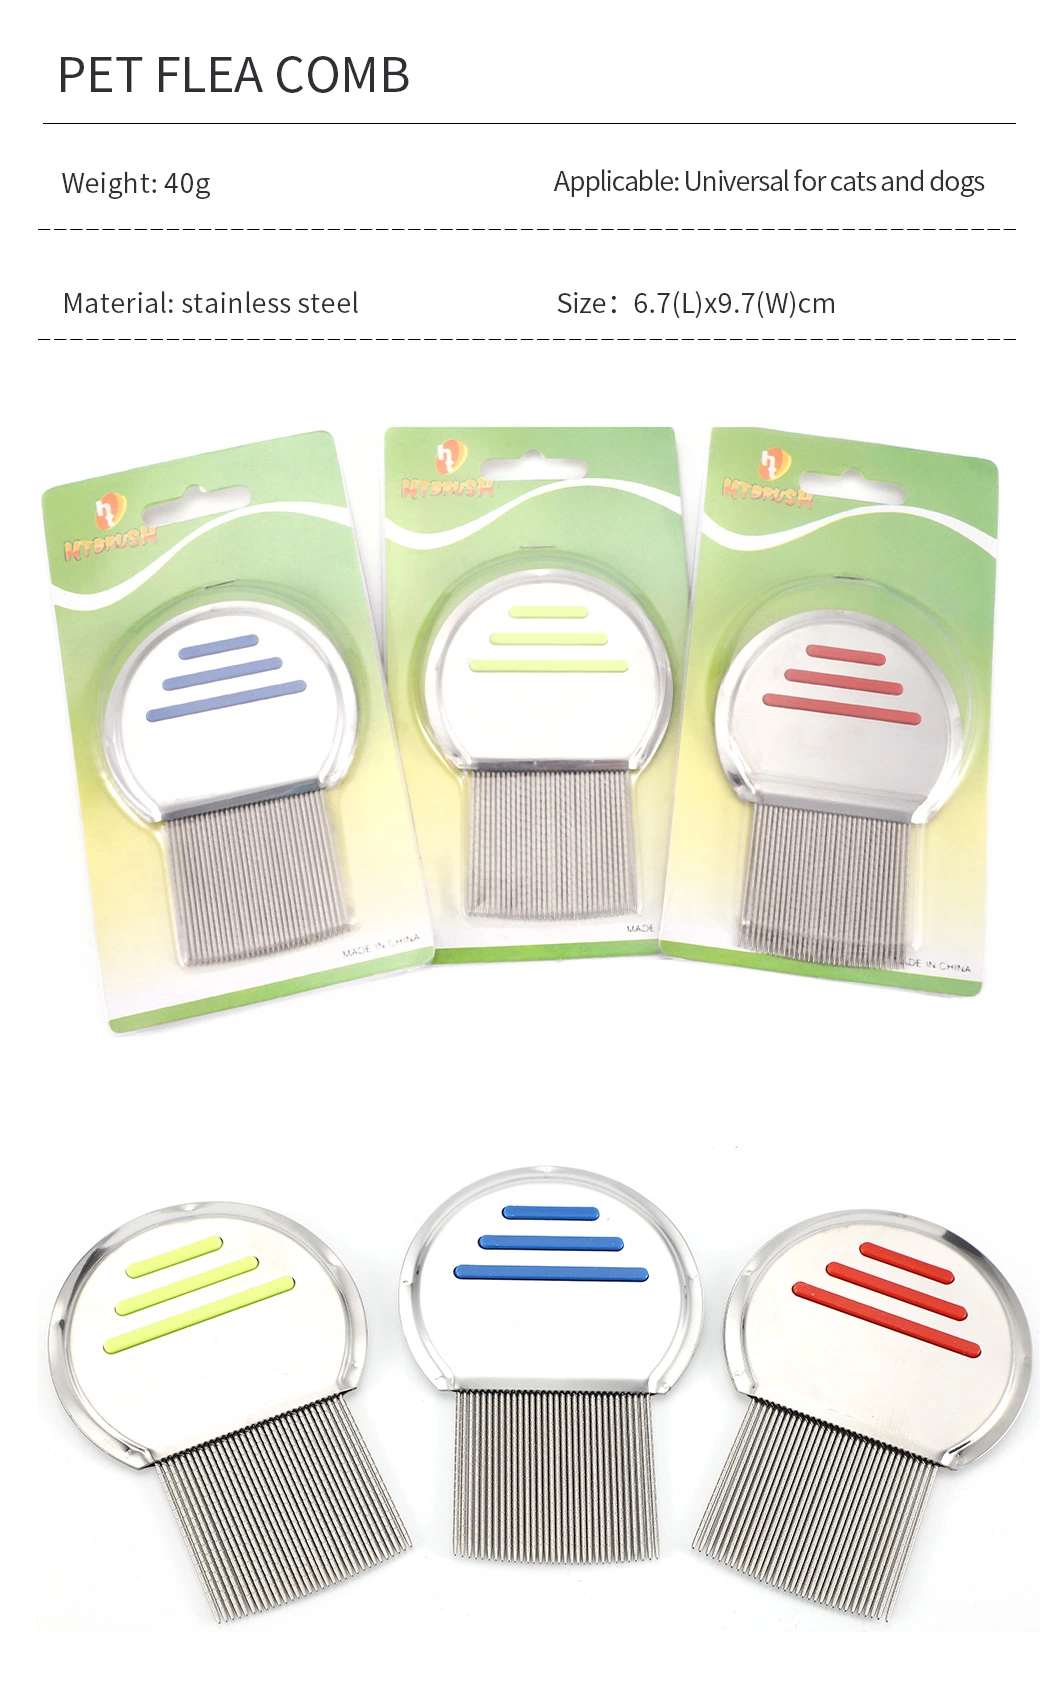 Factory Logo Customized Multi-Colored Stripes Welded Pins Stainless Steel Pet Dog Comb for Lice/Flea/Louses Clean